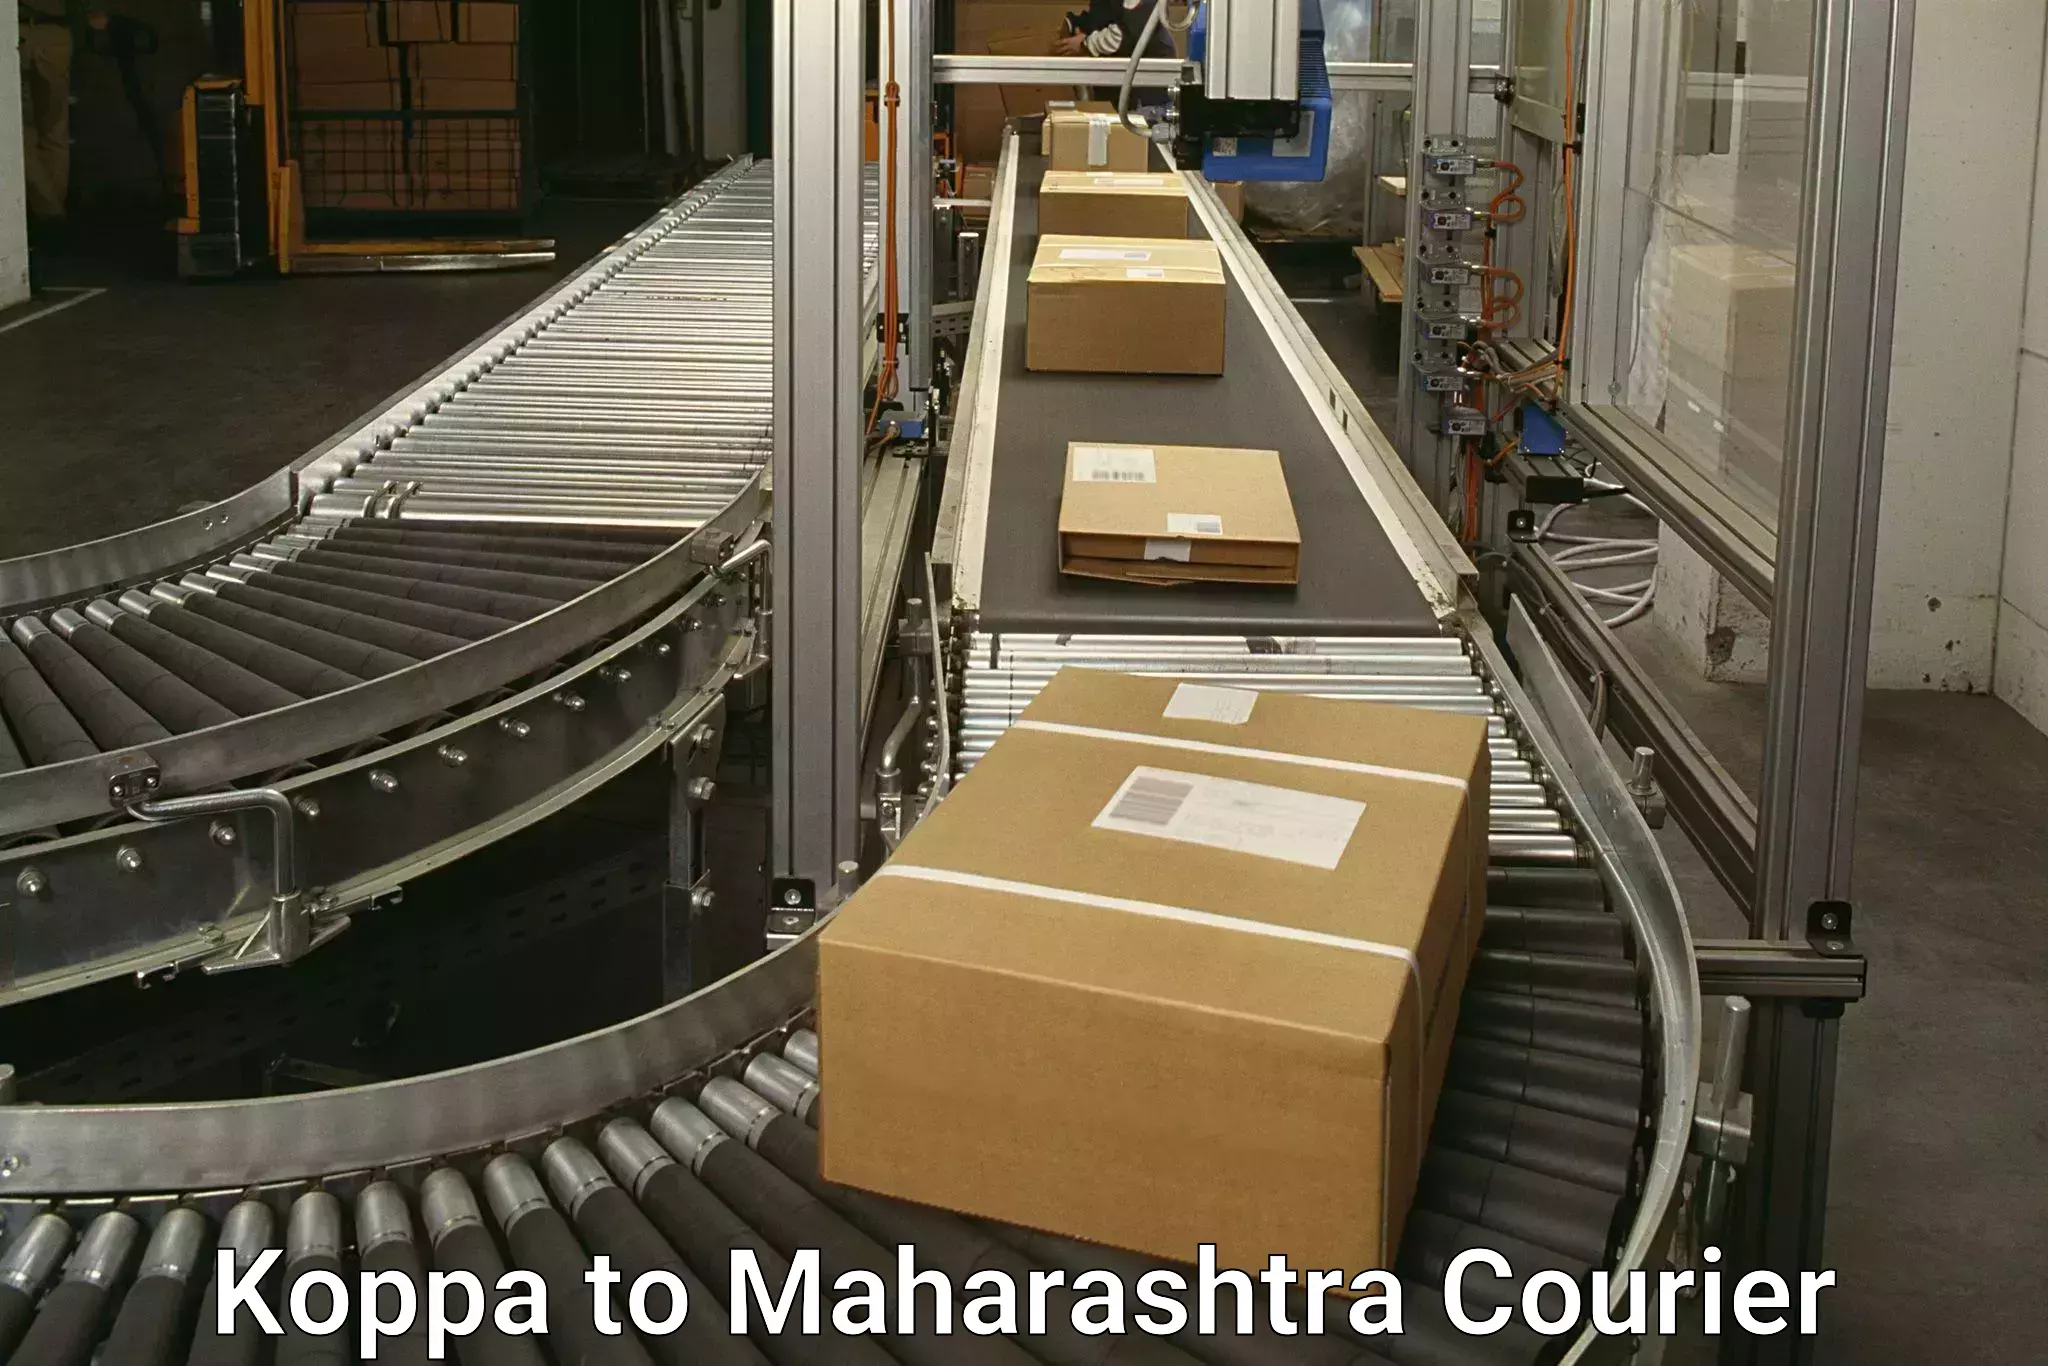 End-to-end delivery in Koppa to Mumbai Port